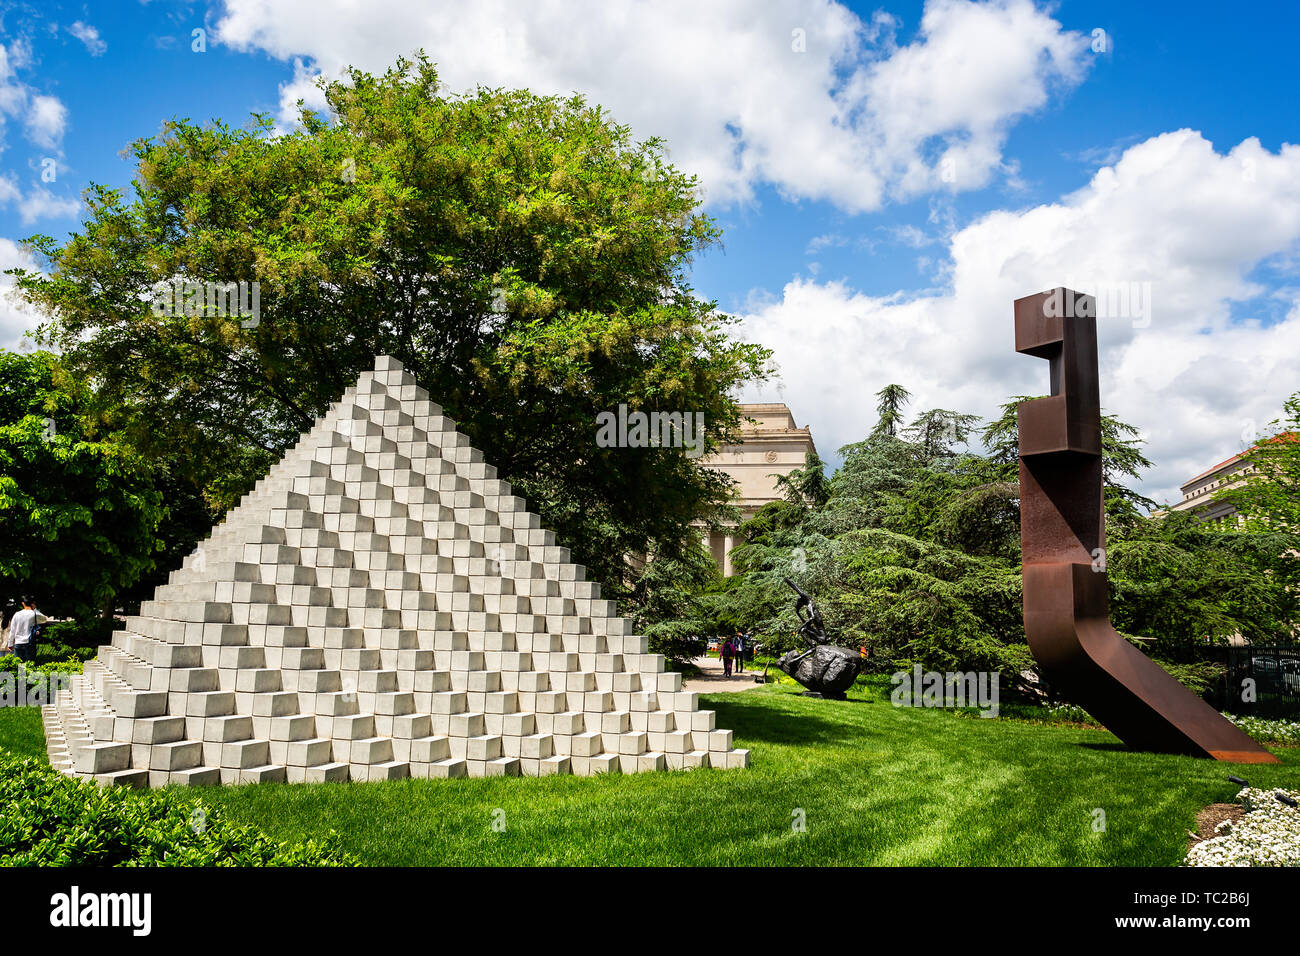 Sculpture titled 'Four-Sided Pyramid'  by Sol LeWitt on display in the National Gallery of Art Sculpture Garden in Washington, D.C. USA on 14 May 2019 Stock Photo